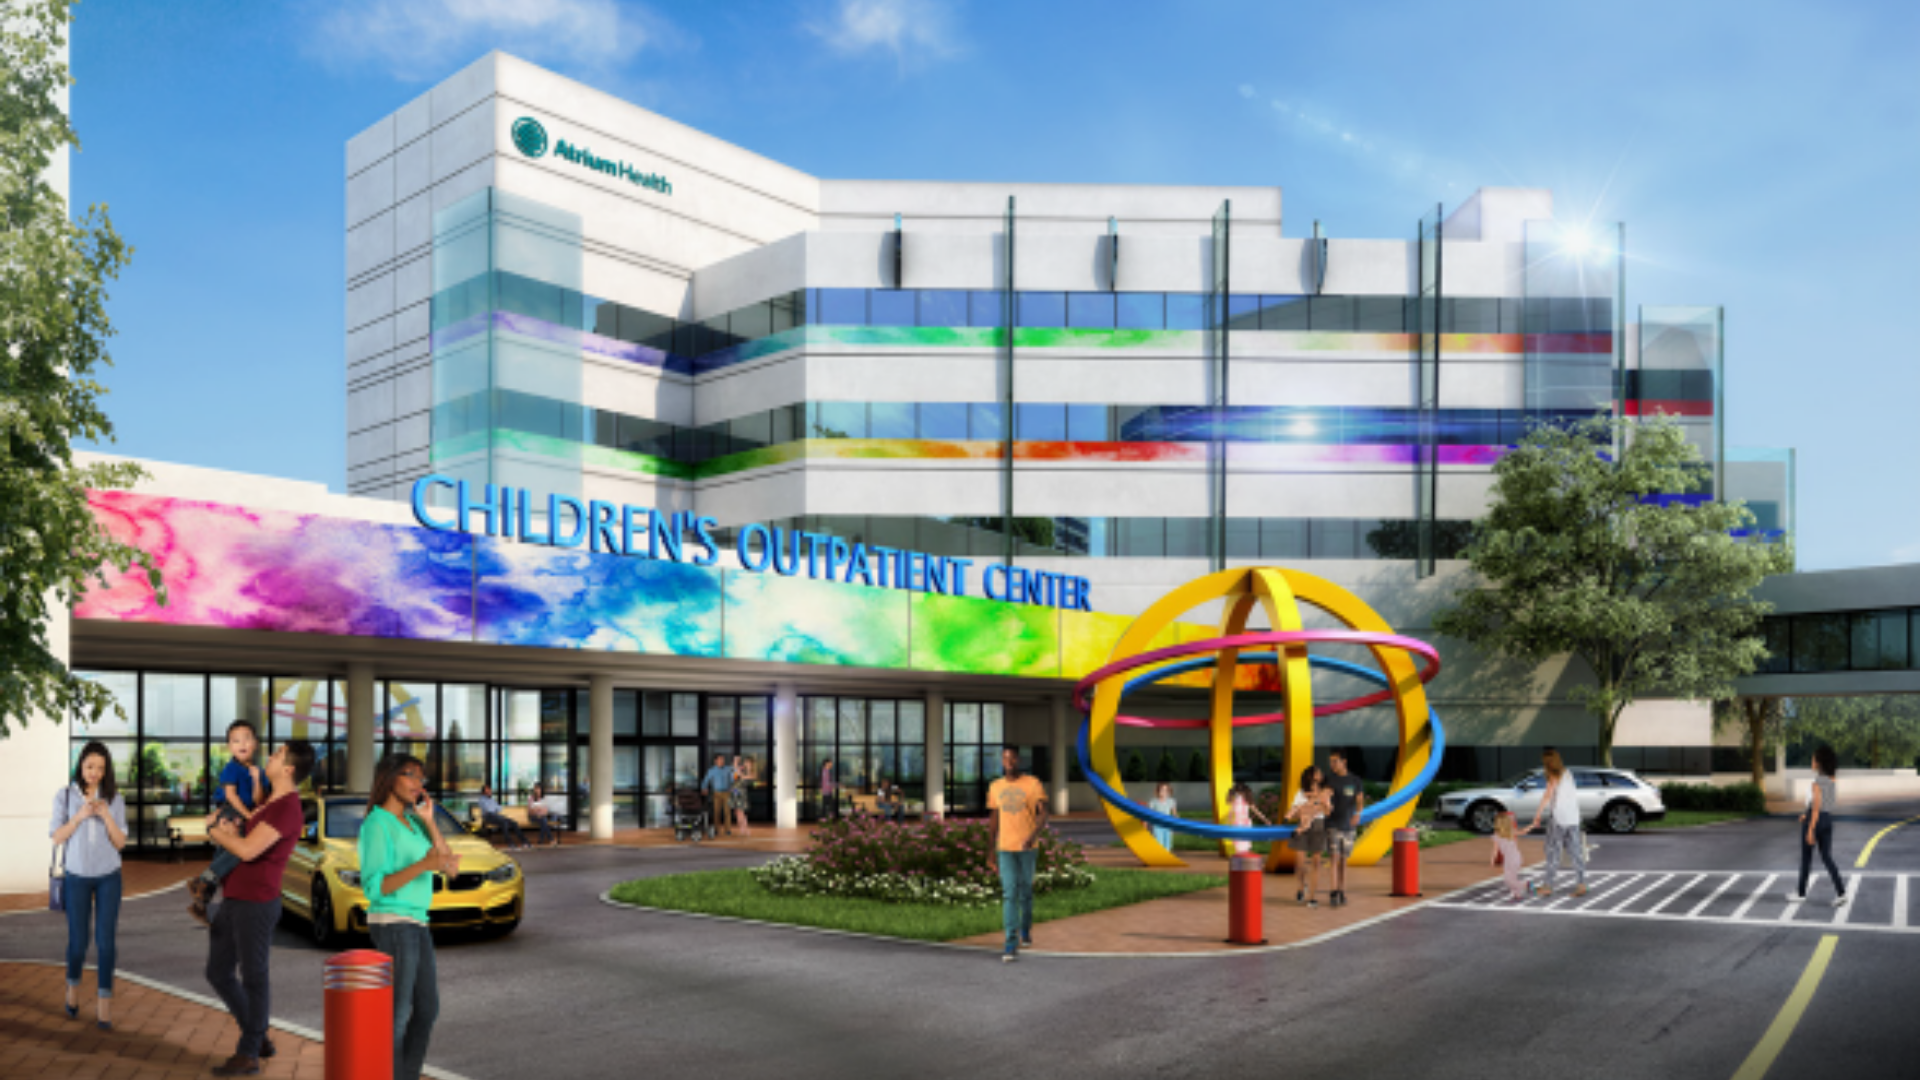 The Reneé and Dewey Jenkins Conference Center to Open in Levine Children’s Outpatient Specialty Center